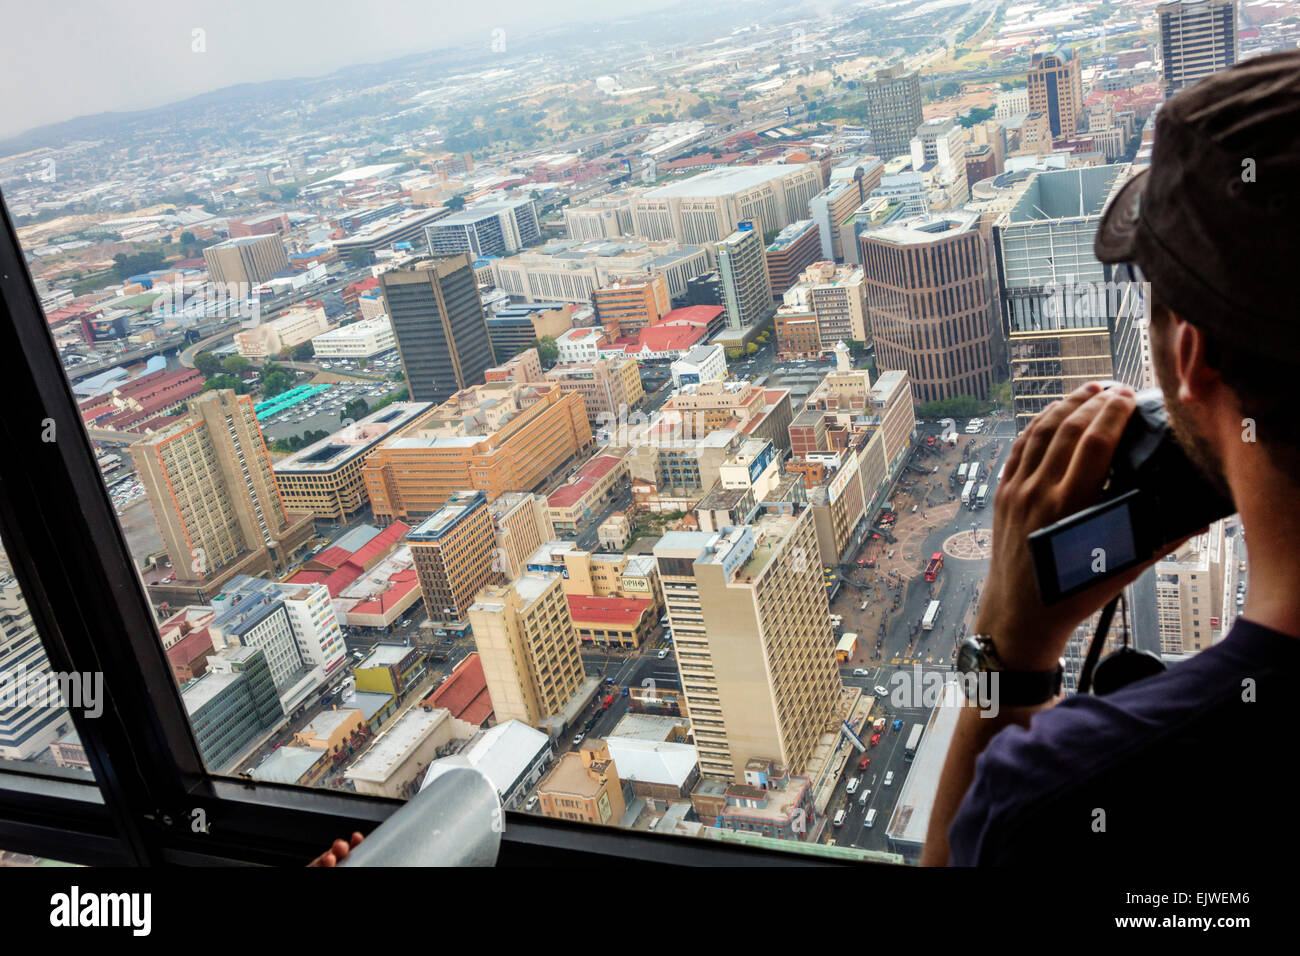 Johannesburg South Africa,Carlton Centre,center,Top of Africa,observatory deck,view from,man men male,looking,buildings,city,SAfri150306128 Stock Photo